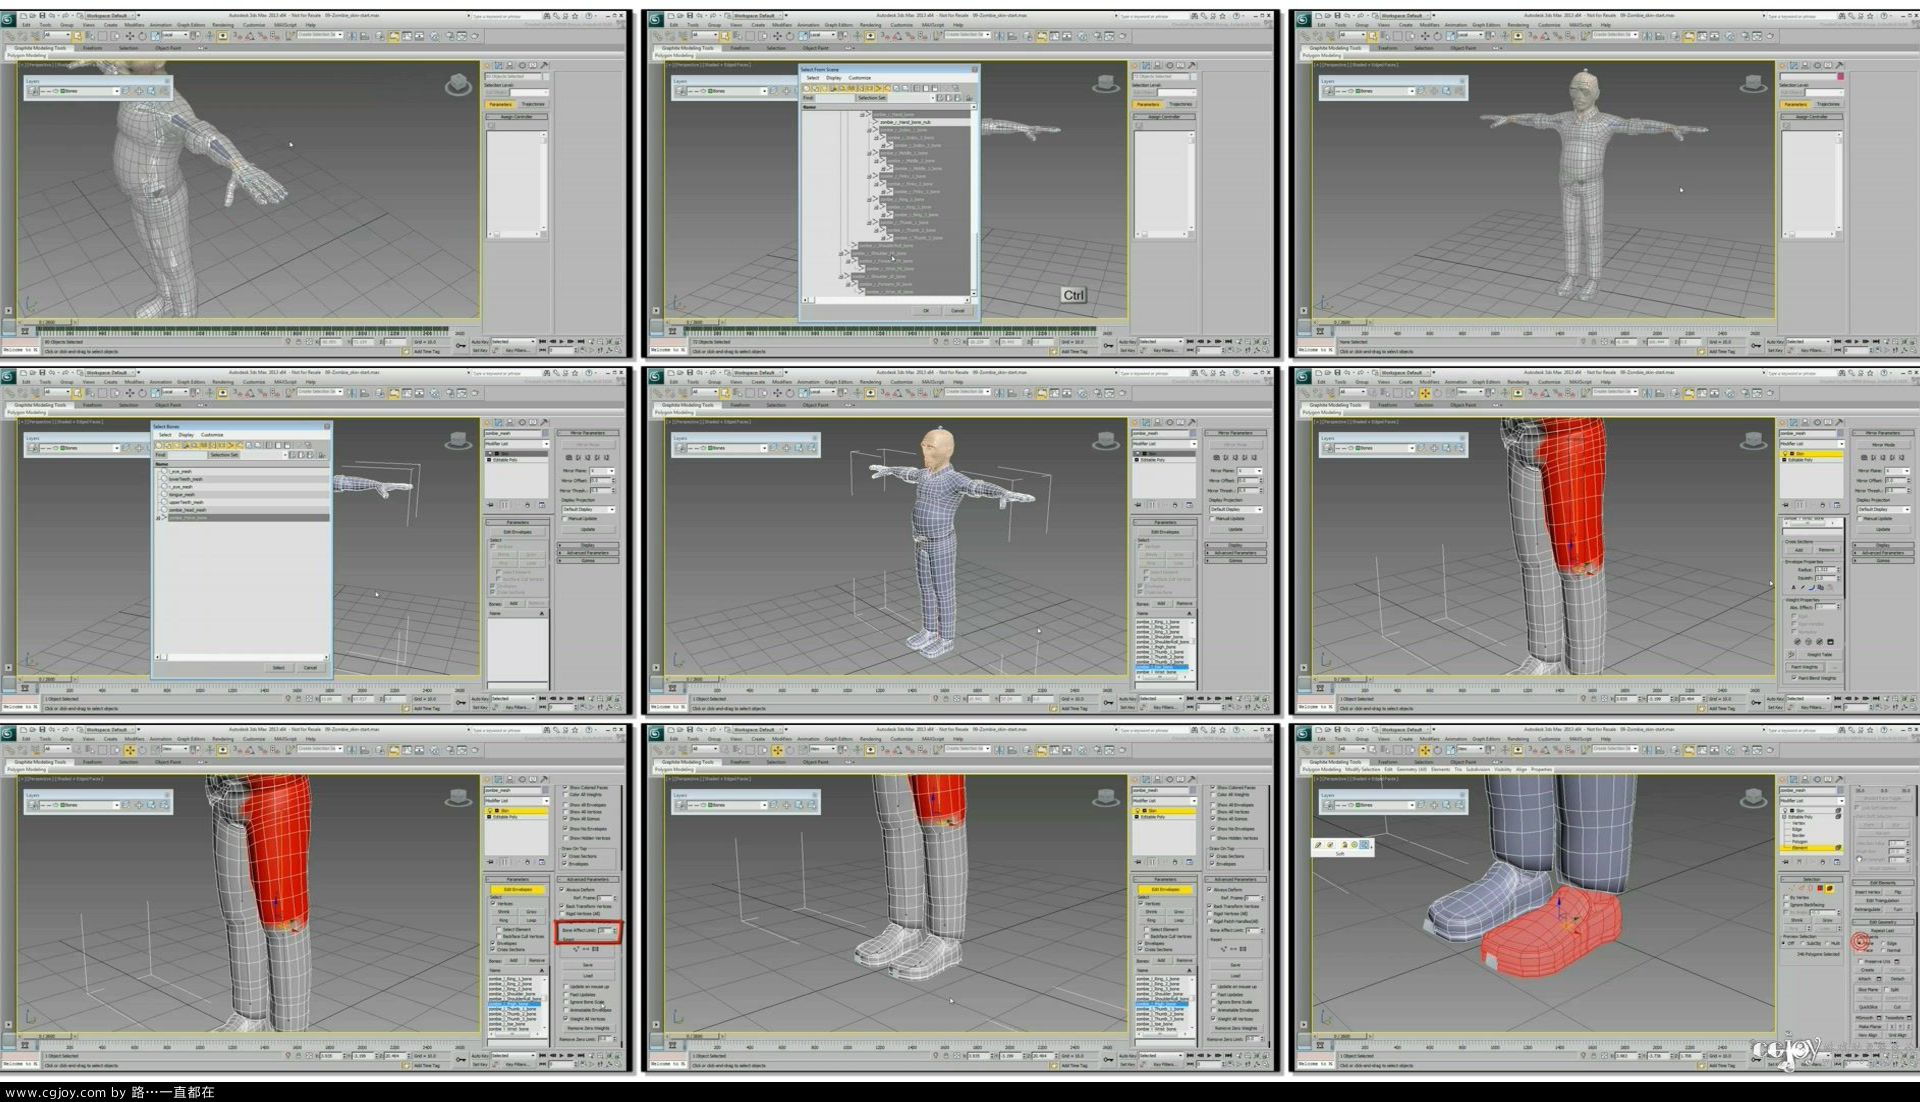 part_1_3_3dsmax_exporting_animations_with_controllers_1920x1080.wmv.jpg